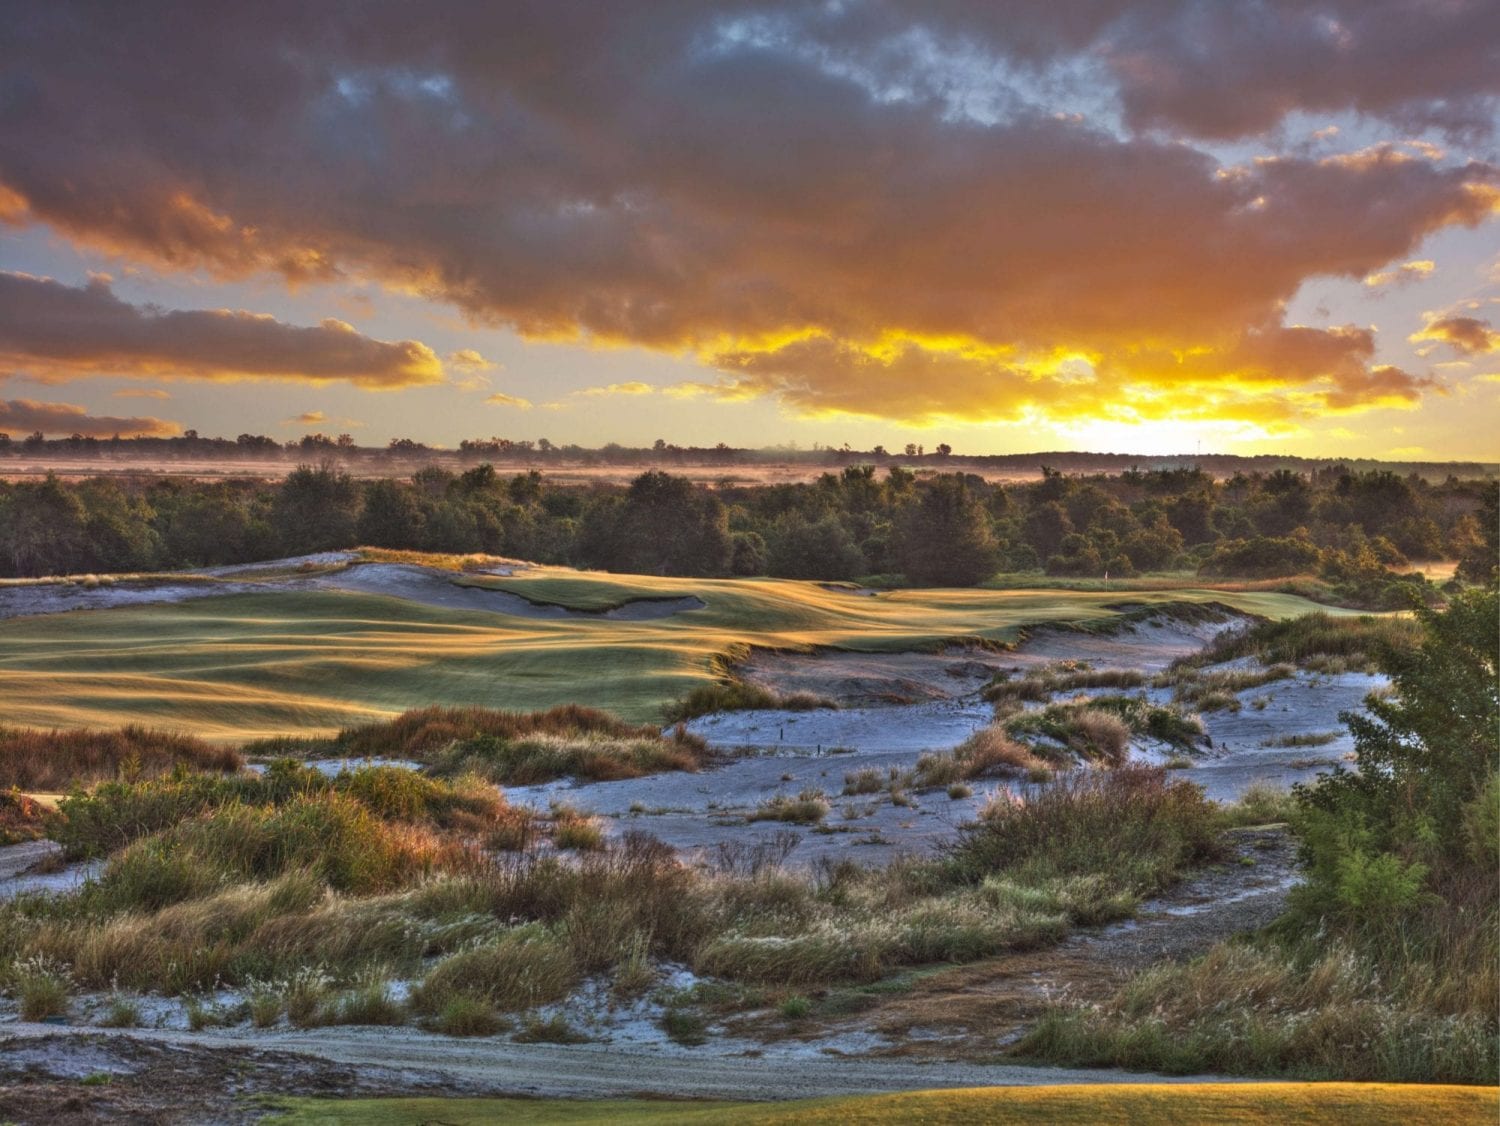 3-Day/3-Night Golf Schools in Florida for Beginners at Streamsong Resort